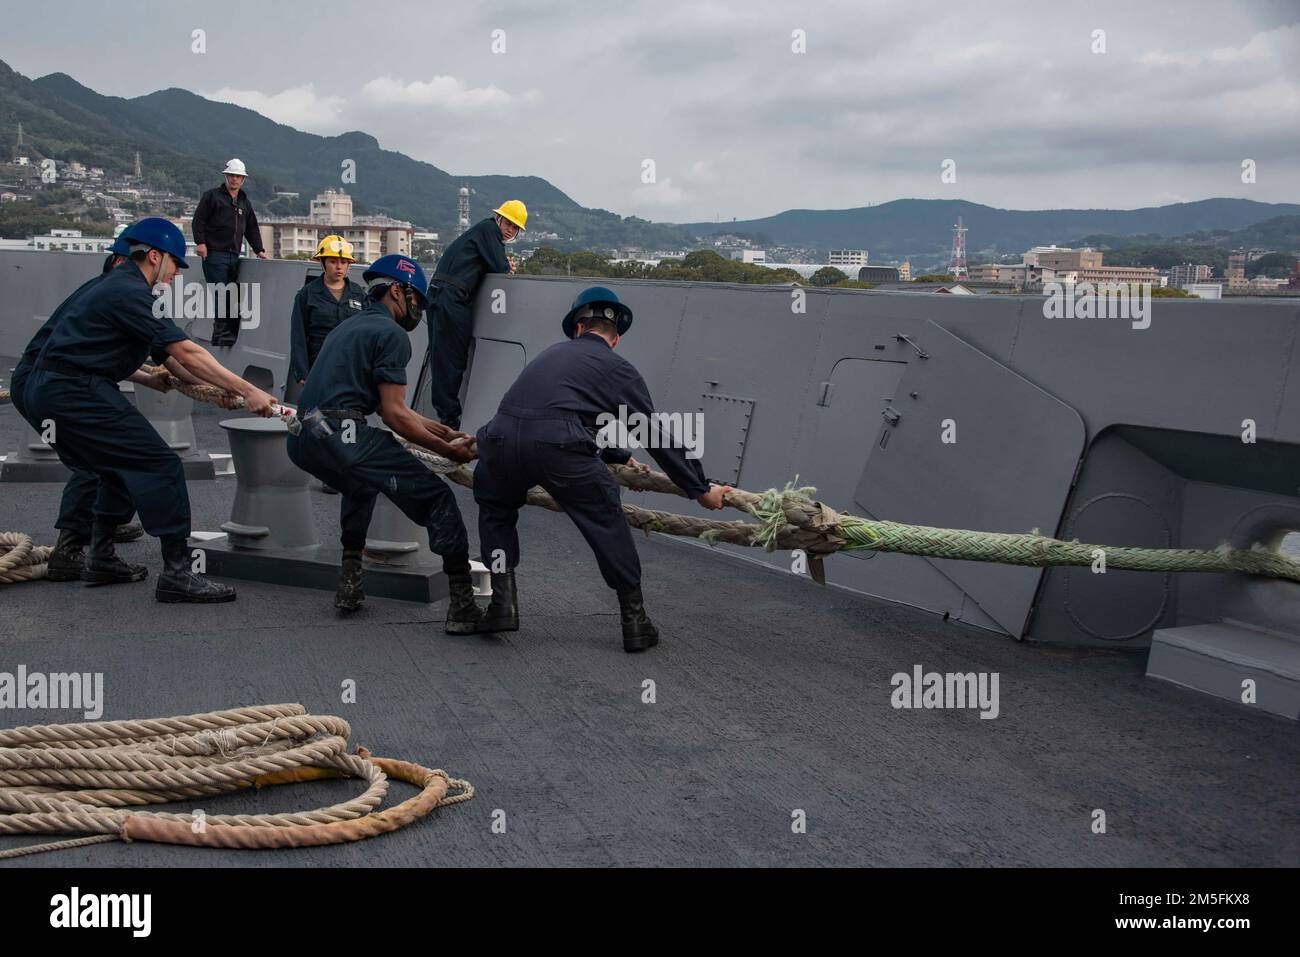 220313-N-XB010-1001 SASEBO, Japan (March 13, 2022) Sailors assigned to USS New Orleans (LPD 28) heave line on the ship’s forecastle. New Orleans, part of the America Amphibious Ready Group, along with the 31st Marine Expeditionary Unit, is operating in the U.S. 7th Fleet area of responsibility to enhance interoperability with allies and partners and serve as a ready response force to defend peace and stability in the Indo-Pacific region. Stock Photo